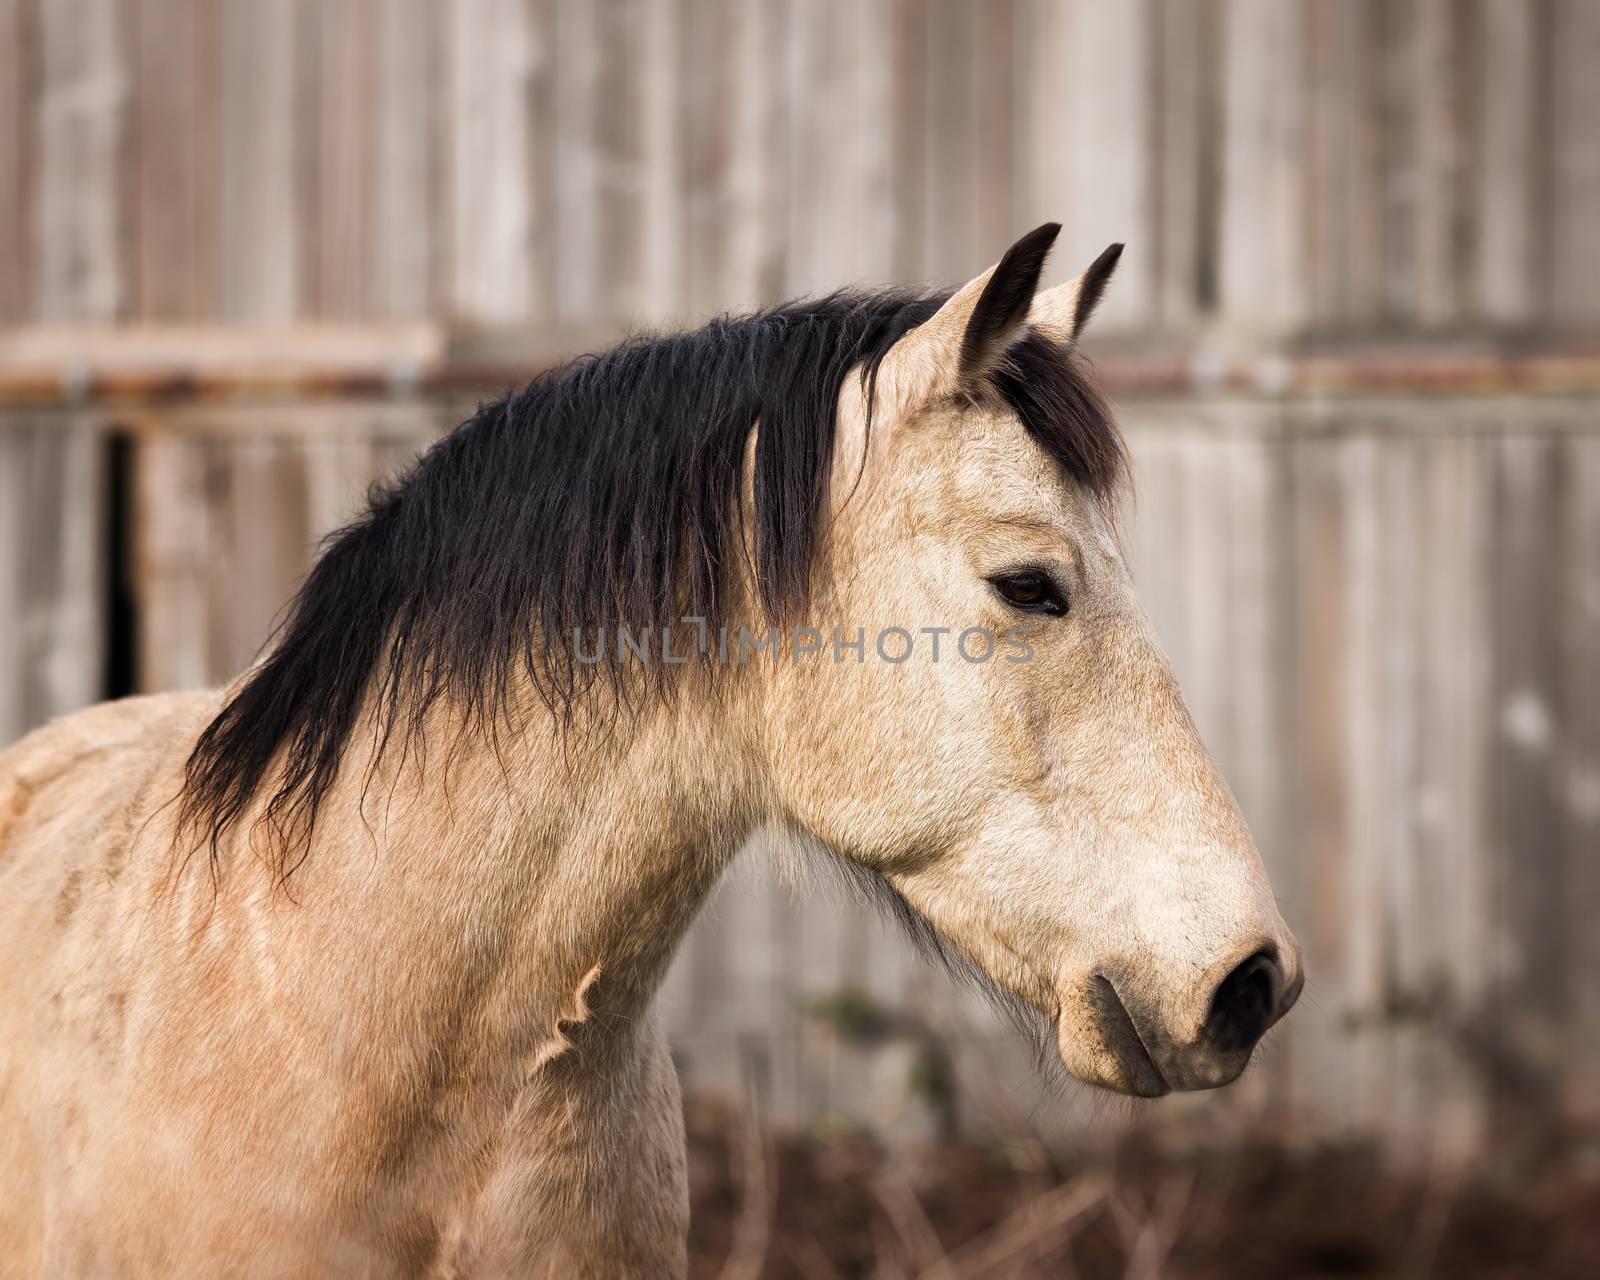 Horse Portrait at His Barn by backyard_photography